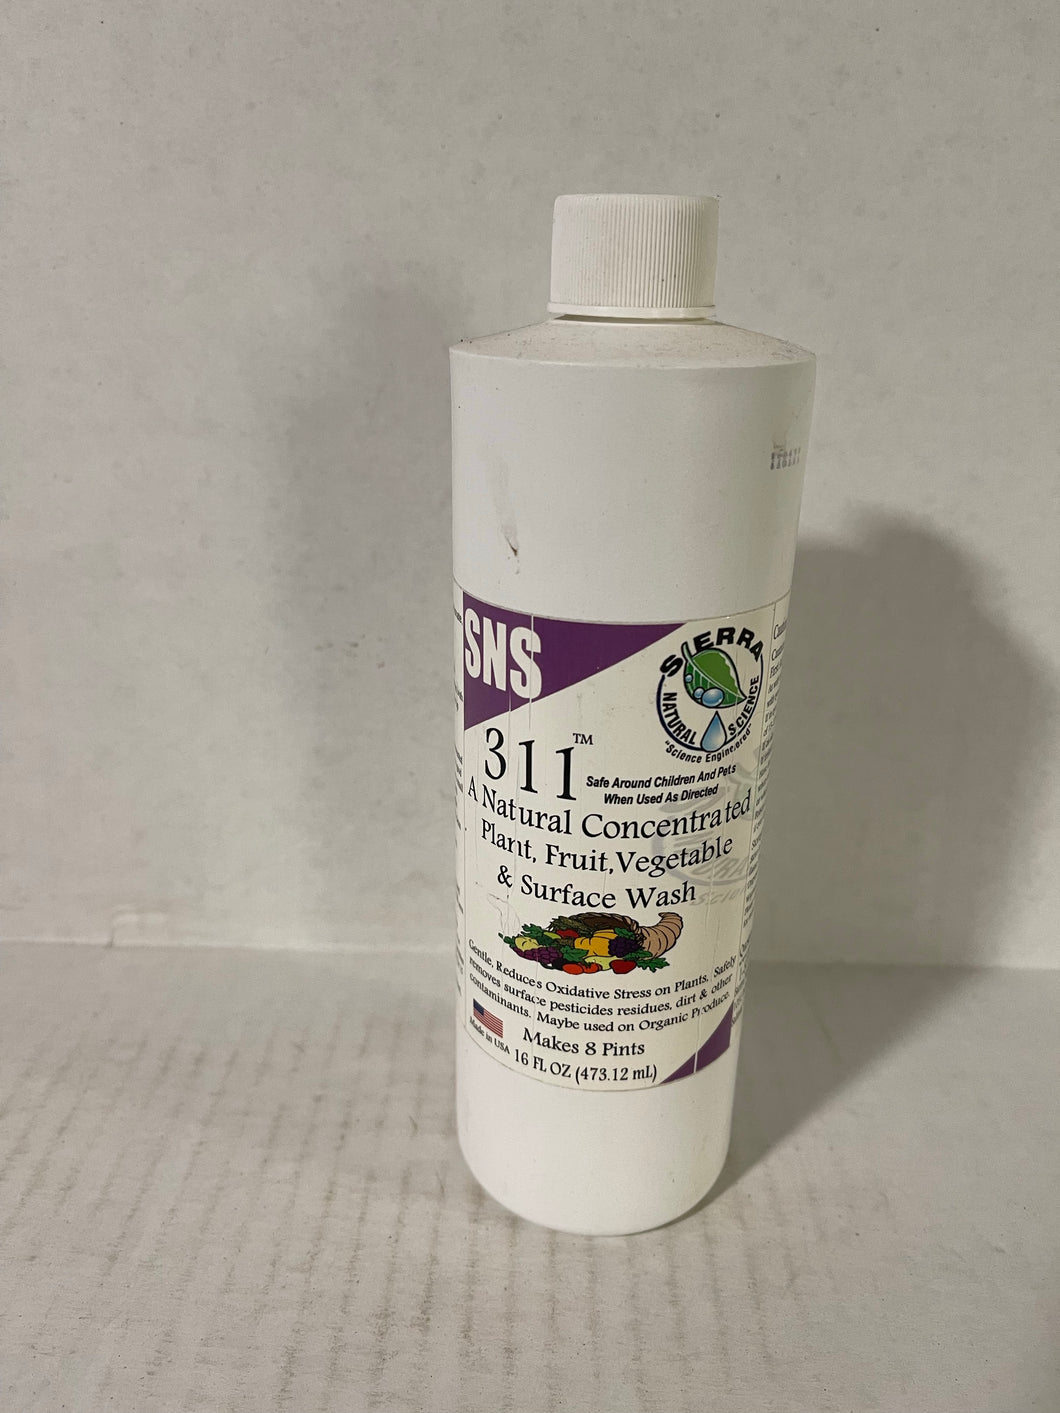 SNS Plant, Fruit,Vegetable and Surface wash